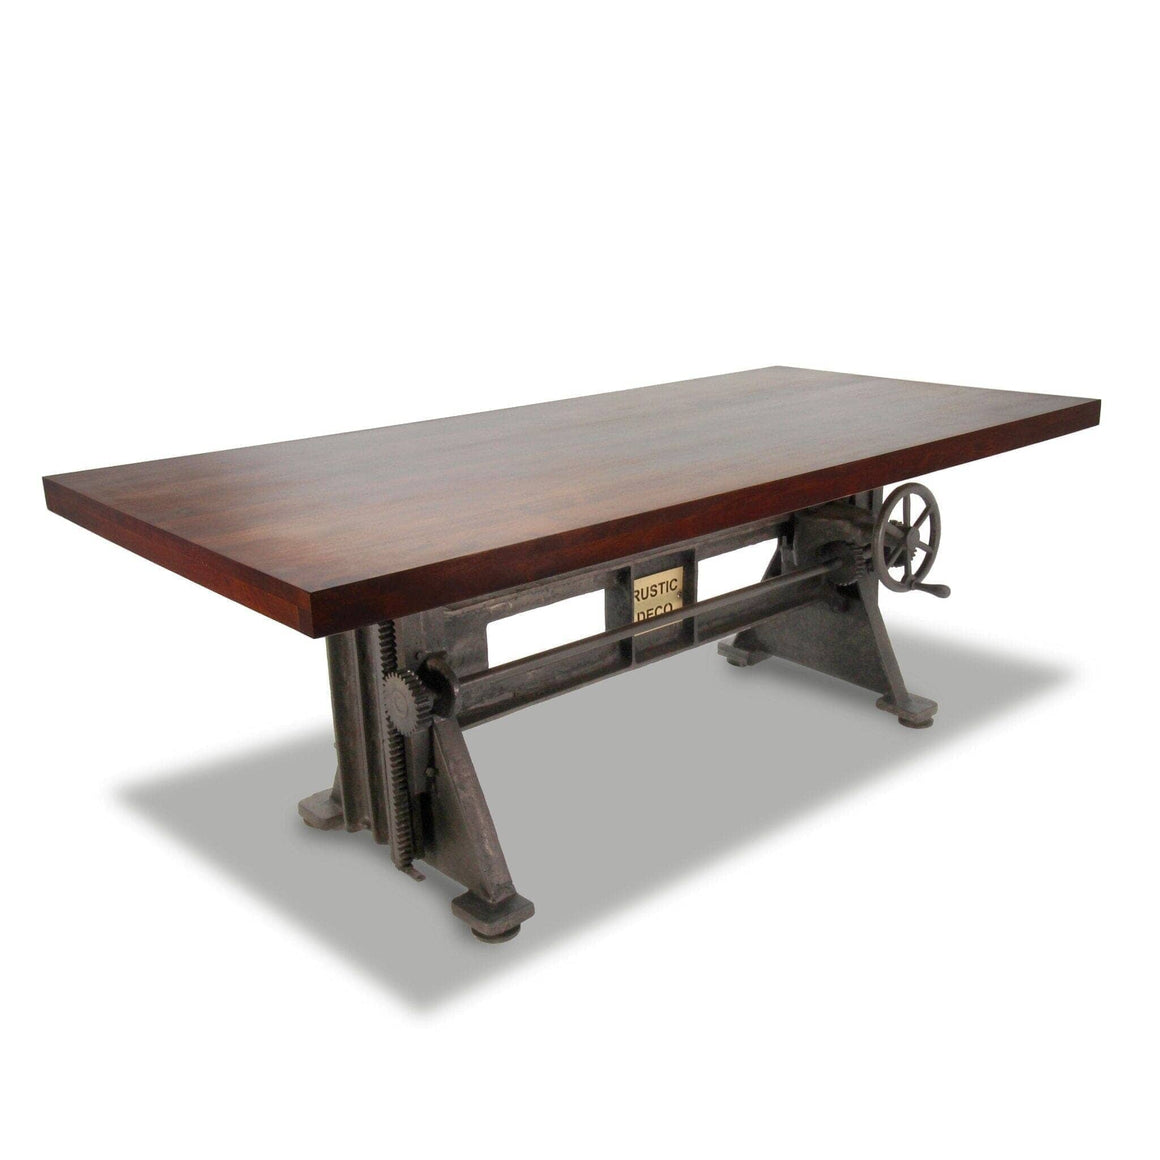 Craftsman Industrial Dining Table - Adjustable Height Iron Base - Mahogany Top - Rustic Deco Incorporated